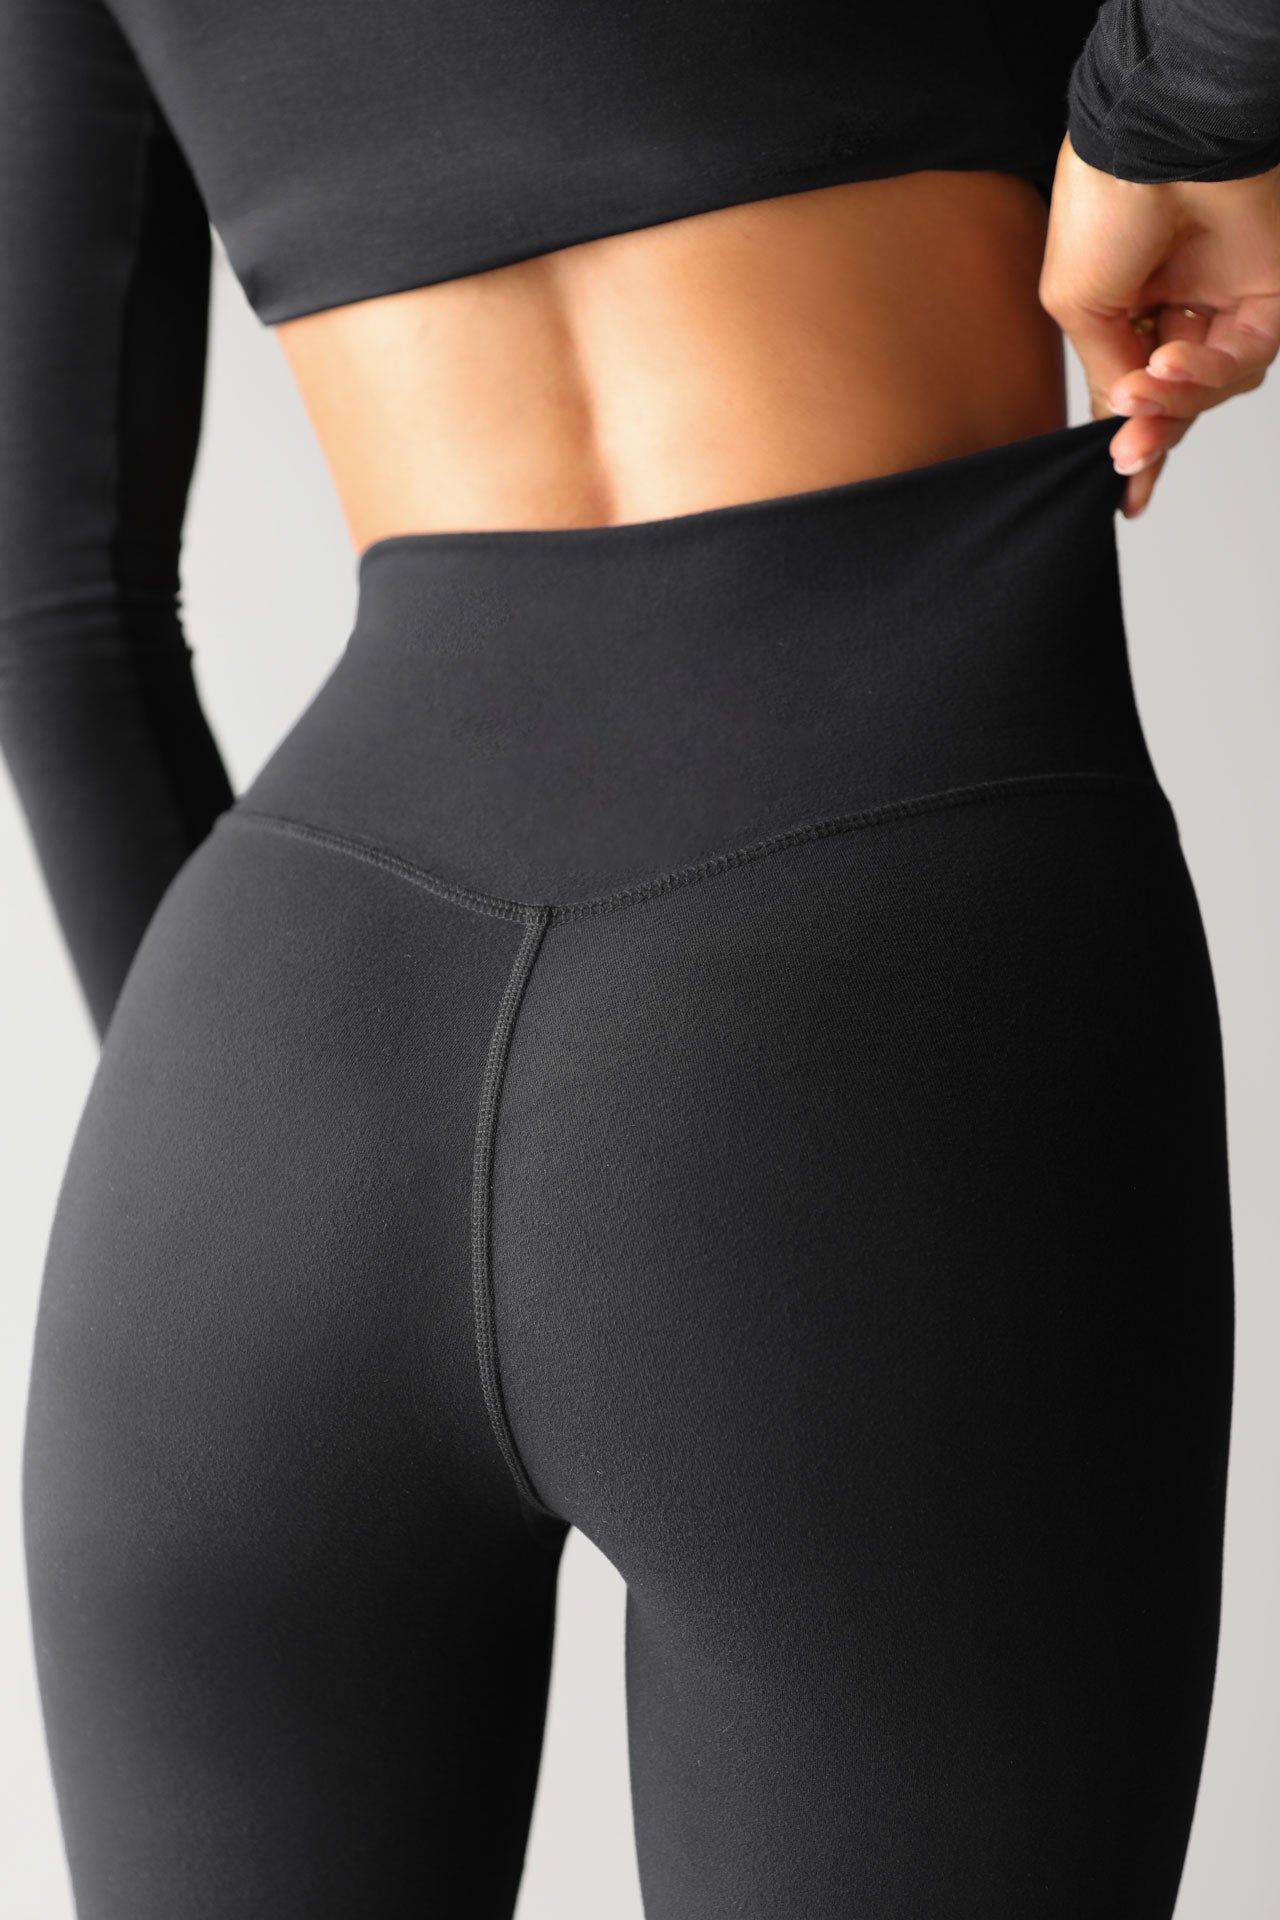 $5 off $21.99 Black Bow Sueded Legging, 2-pack : r/SweetDealsCA